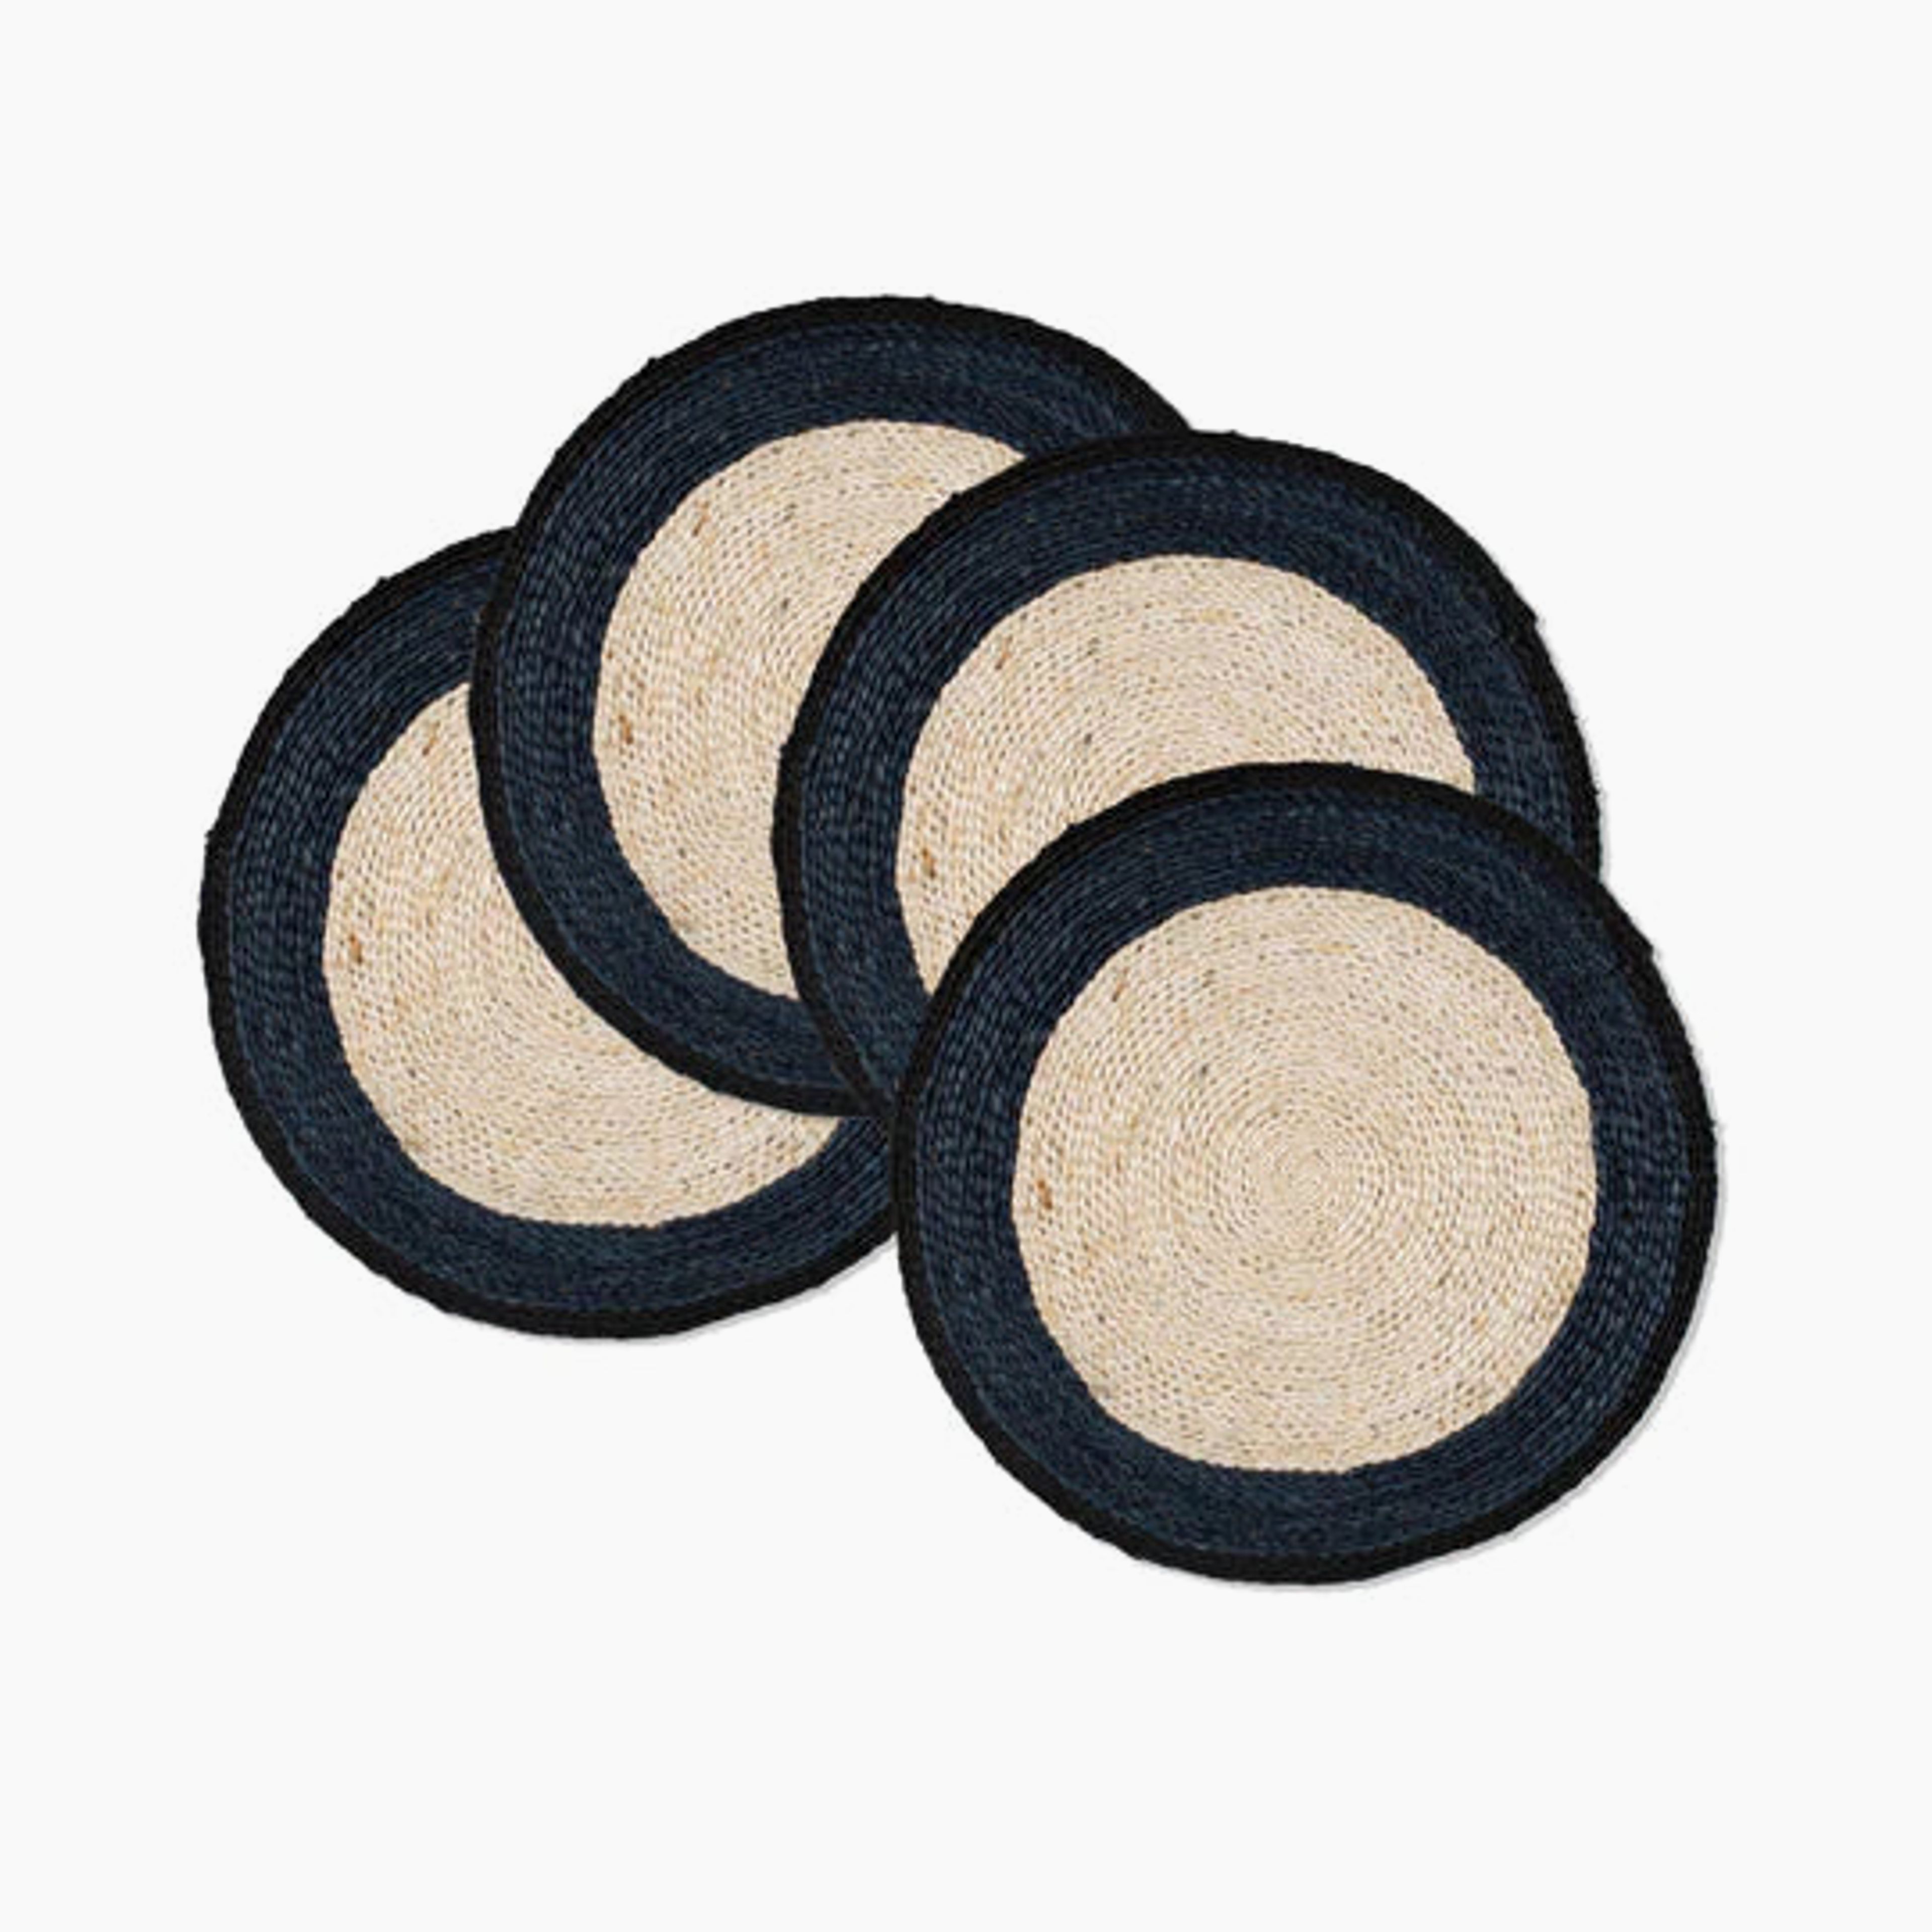 Monochrome Hand-Woven Jute Placemats in Blue/Black (Set of 4)